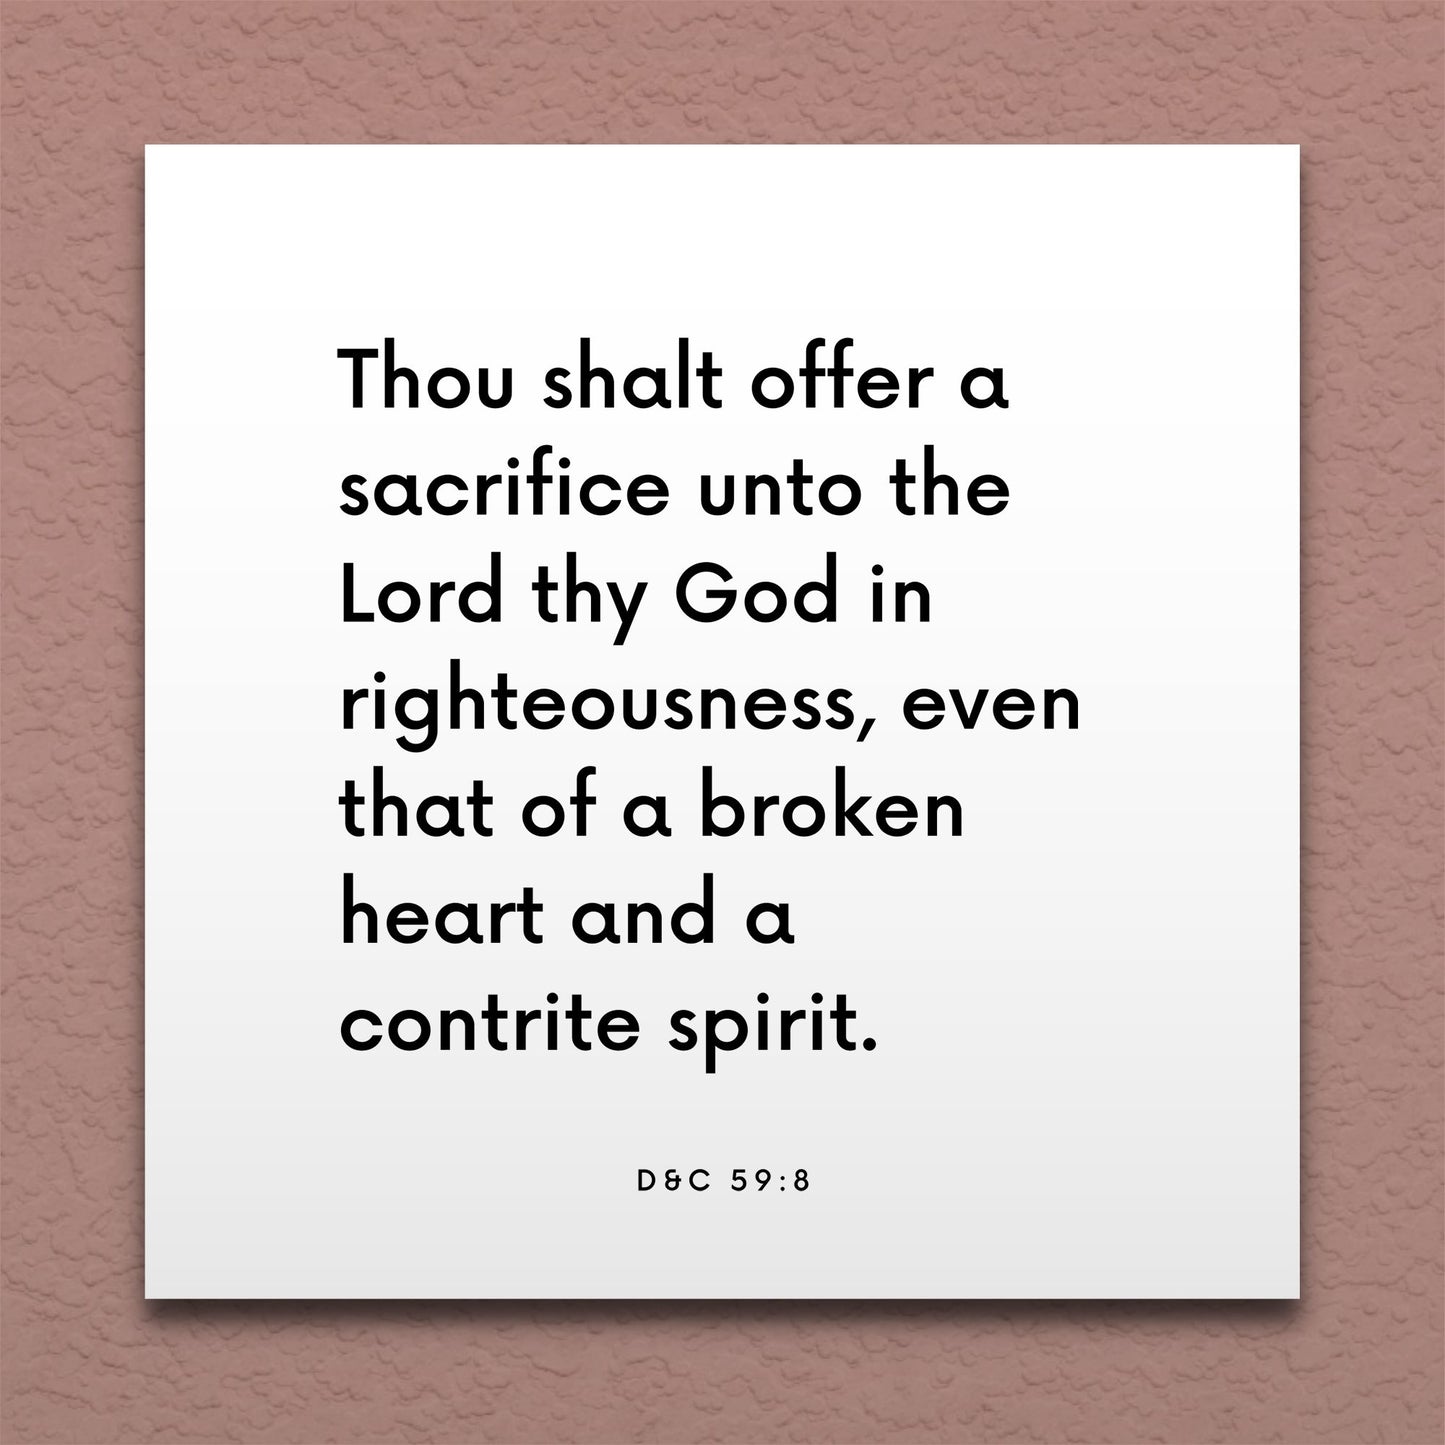 Wall-mounted scripture tile for D&C 59:8 - "Thou shalt offer a sacrifice unto the Lord thy God"